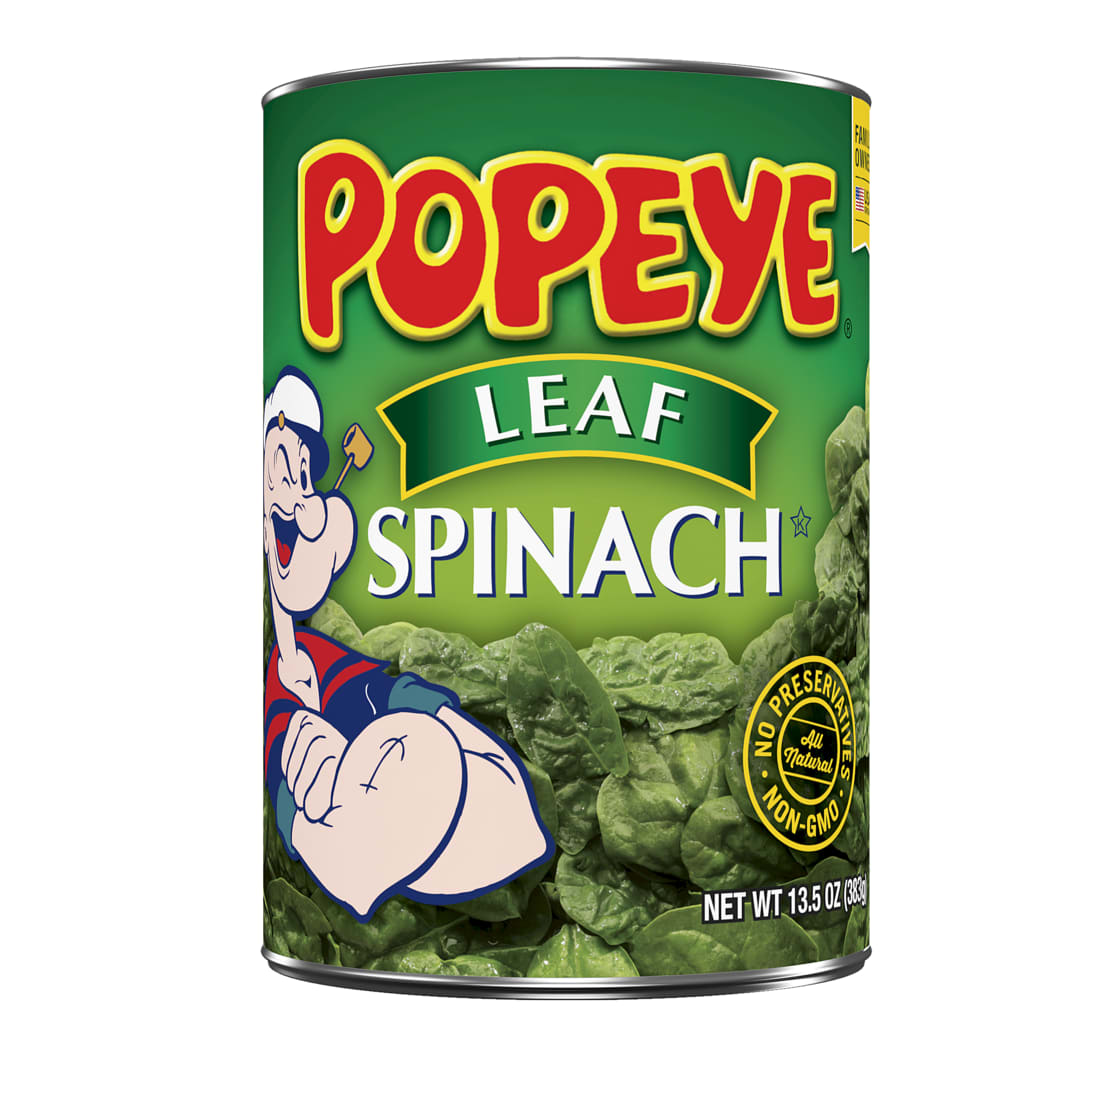 Popeye Leaf Spinach, Canned Vegetables, 13.5 oz Can - DroneUp Delivery